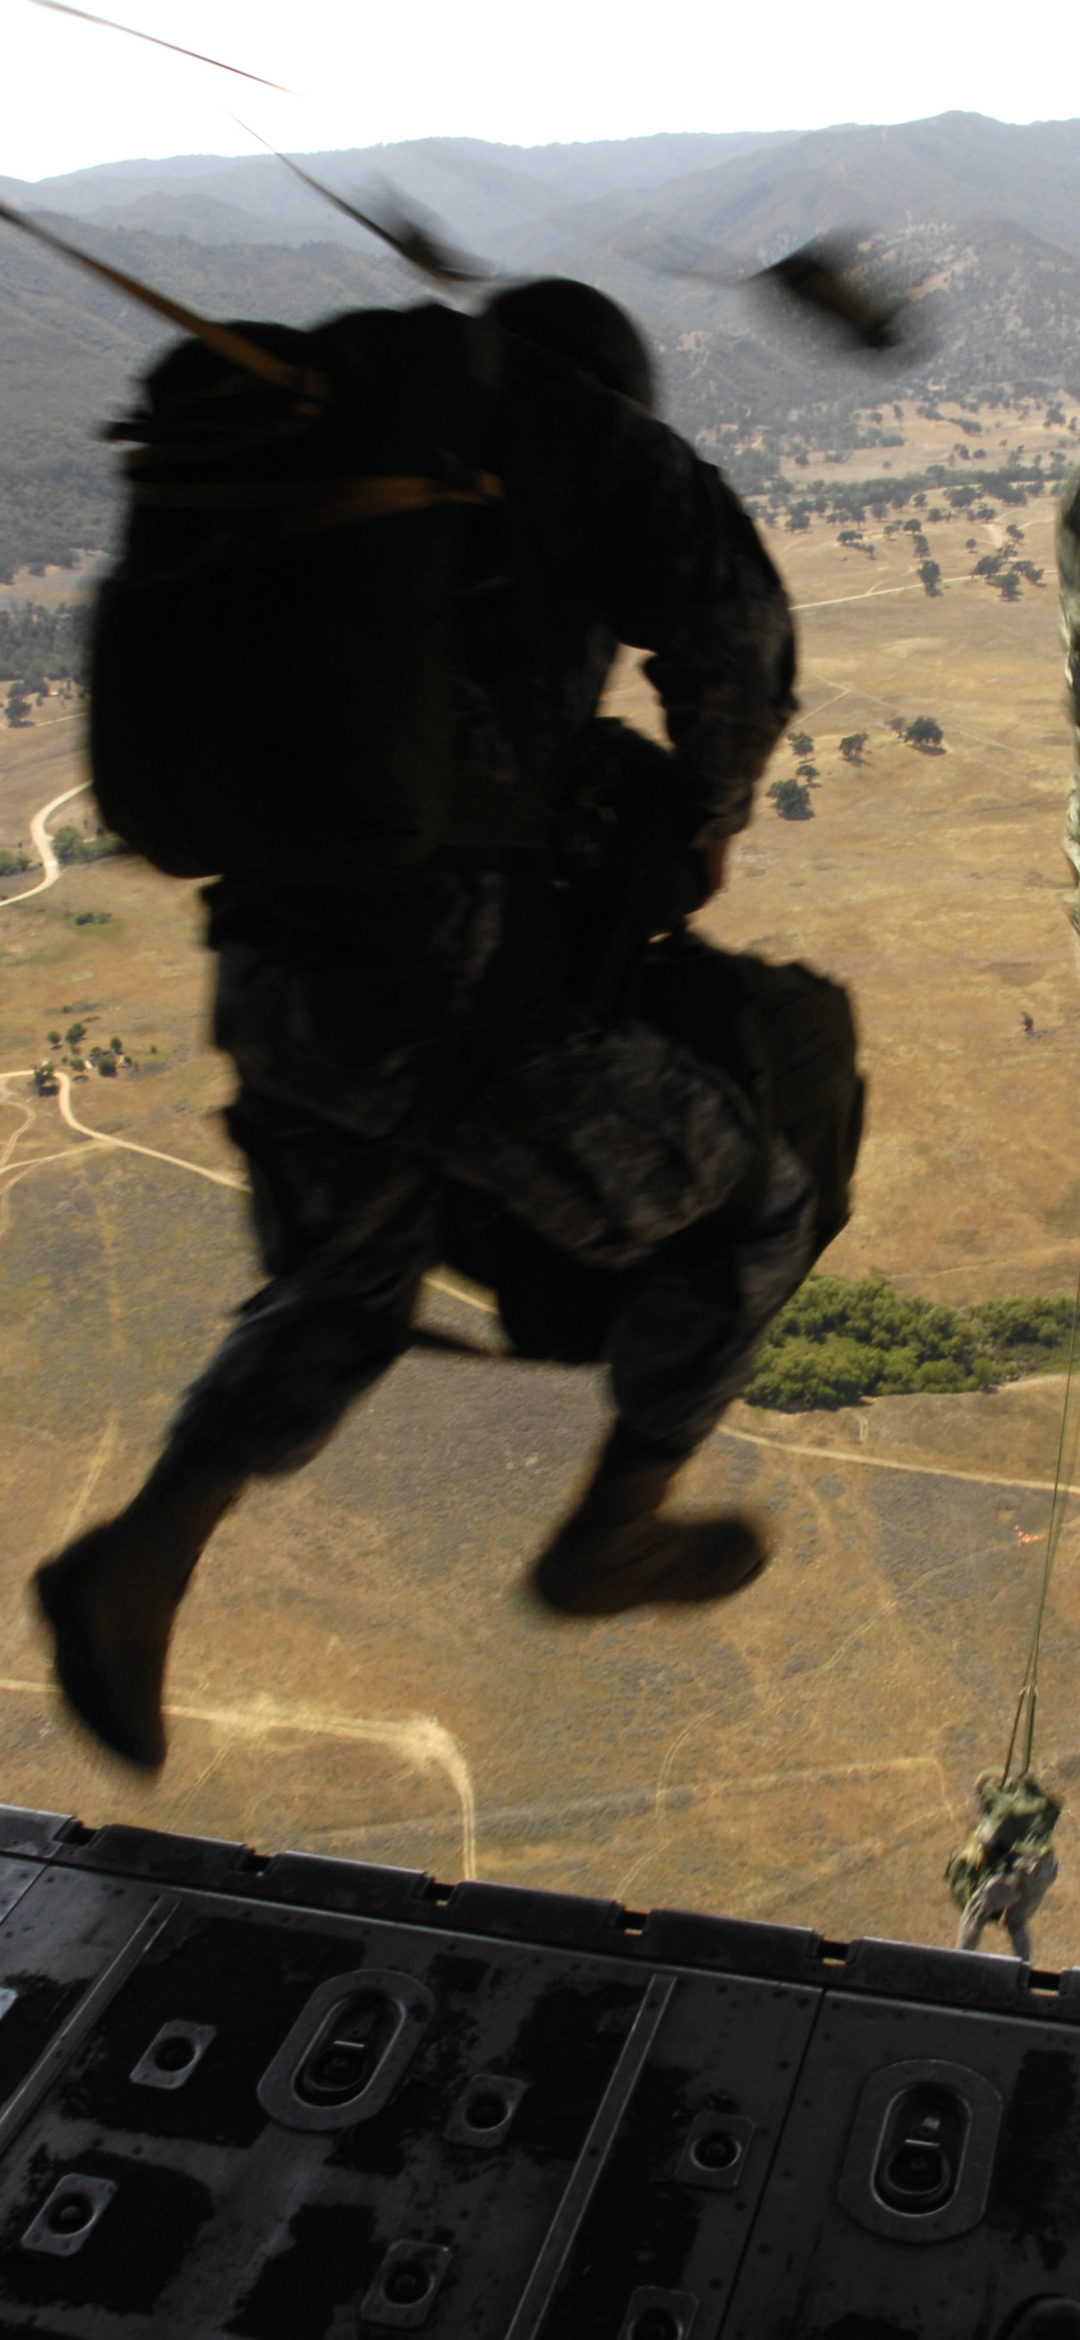 military, soldier, parachuting, paratrooper images